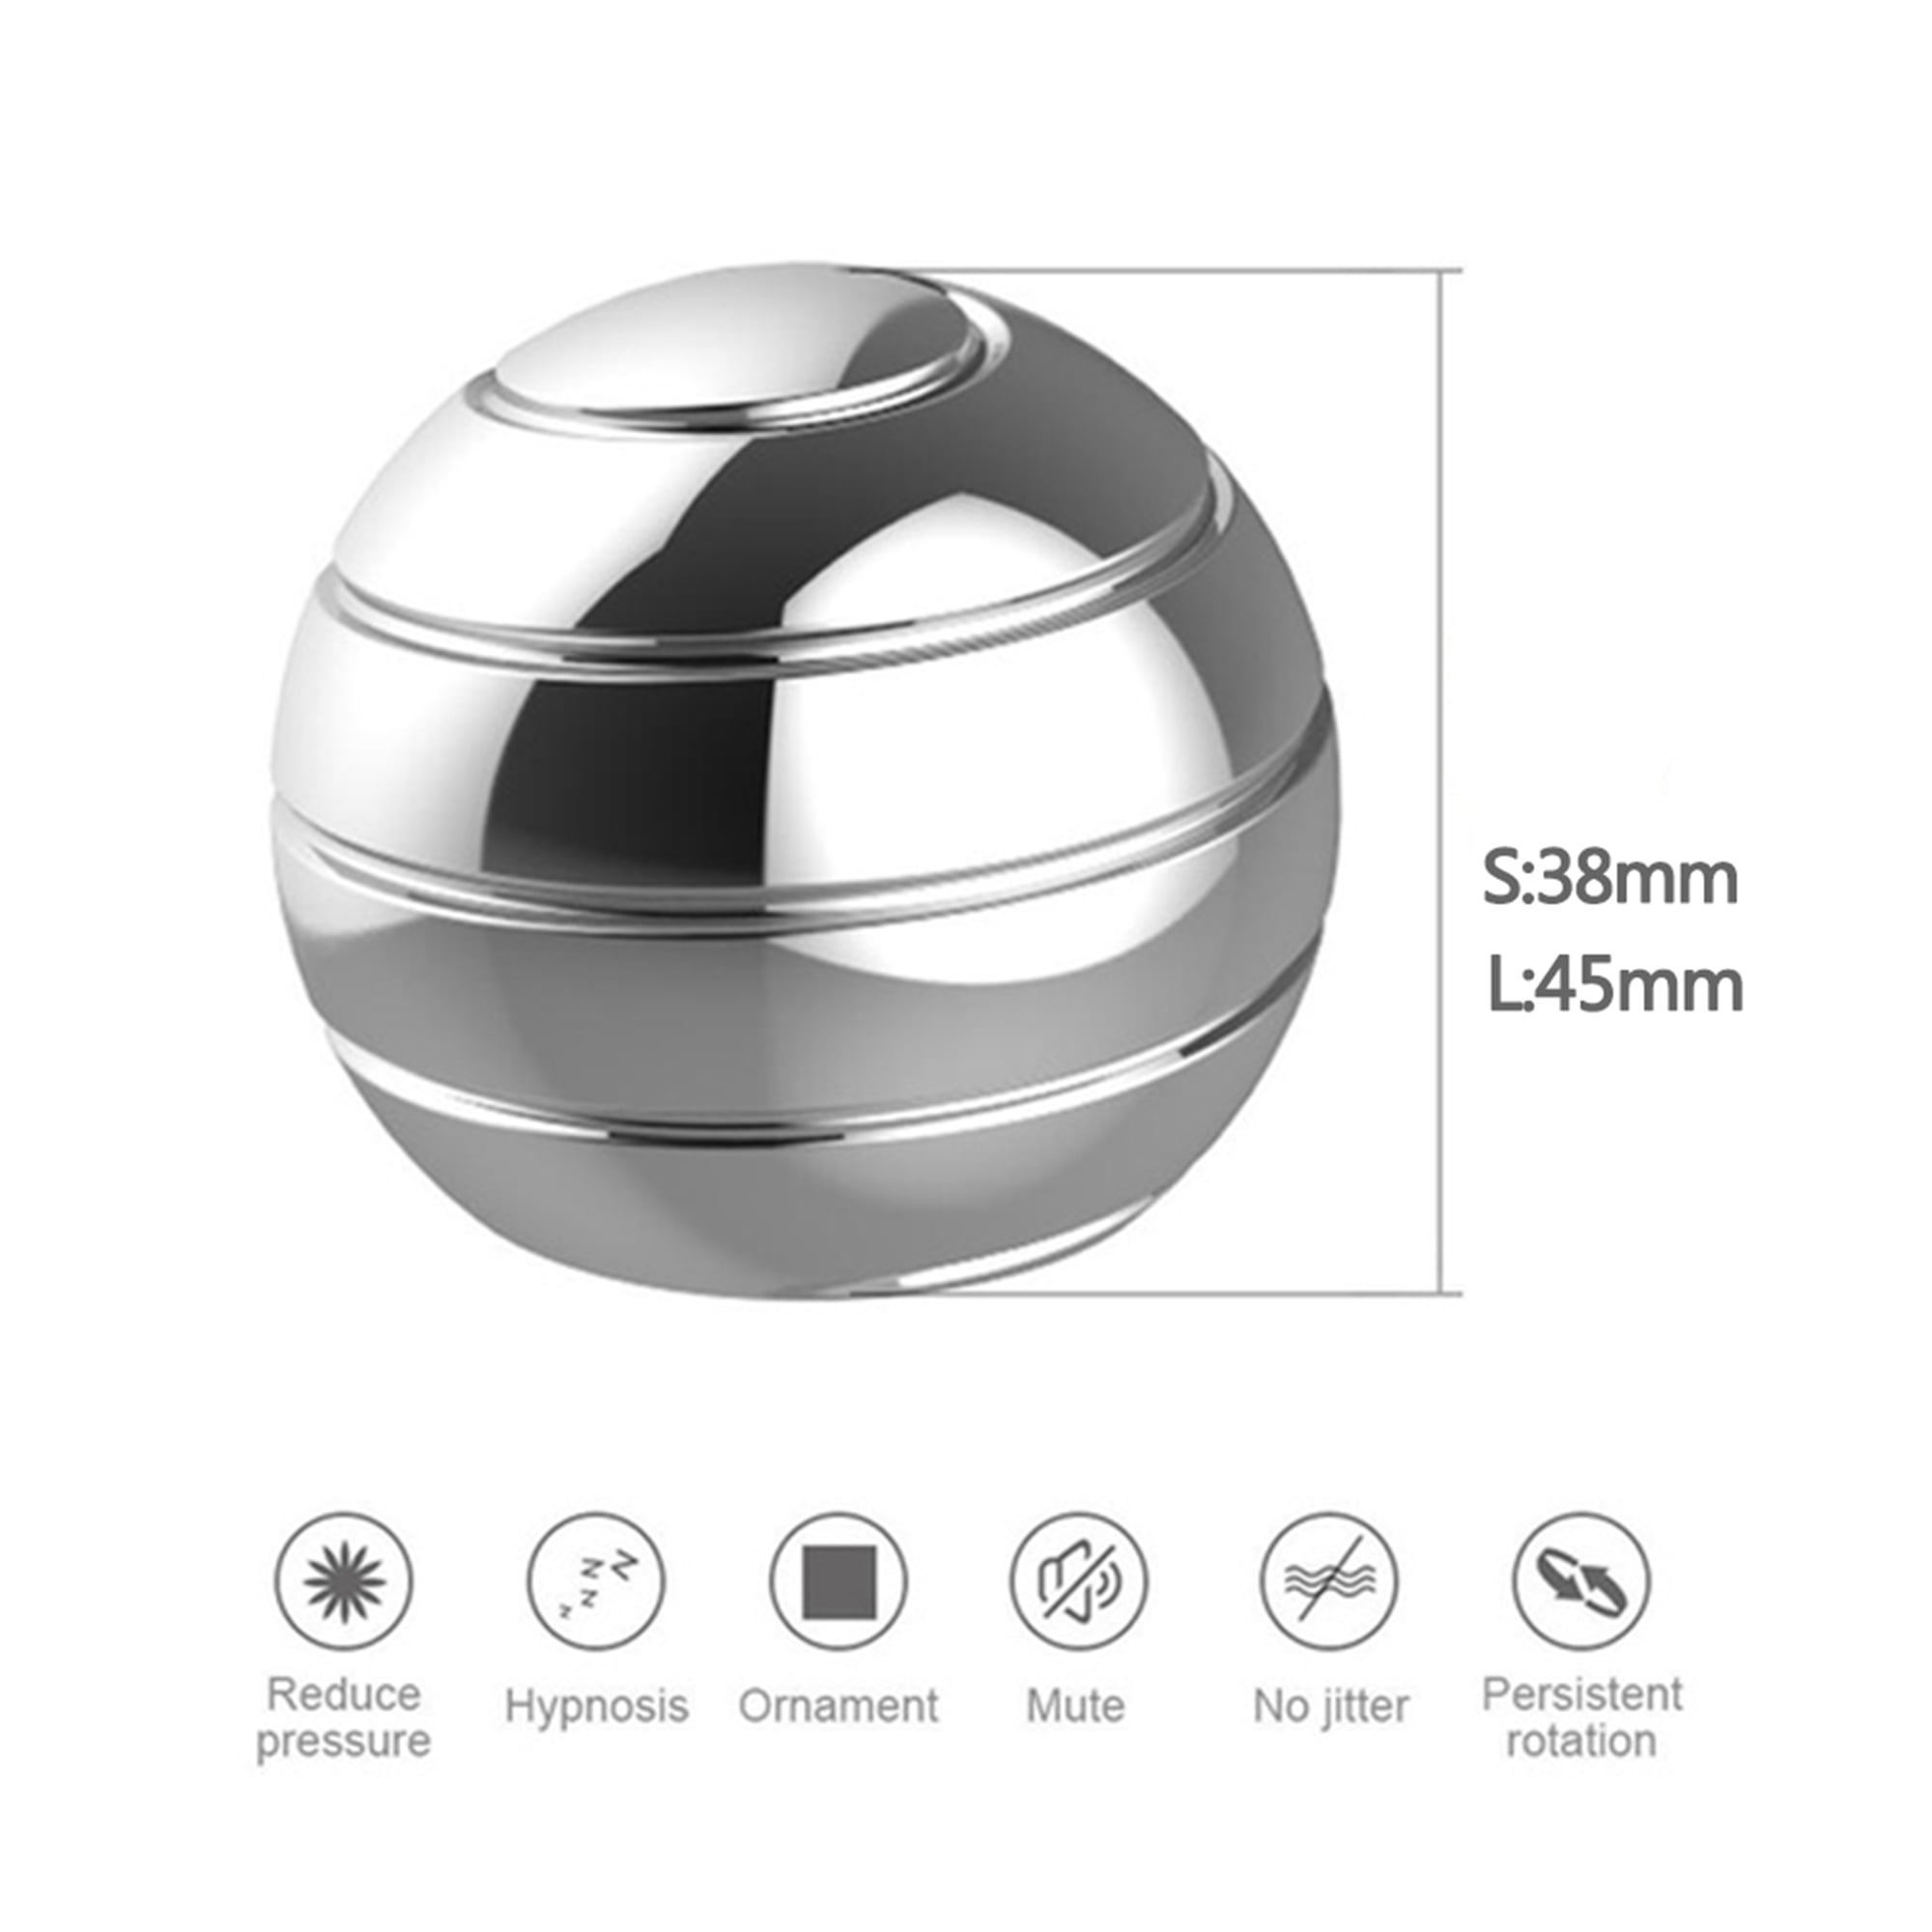 Kinetic Desk Toy Perfect Gift Optical Illusion Spinner Ball Stress Relief 38mm 